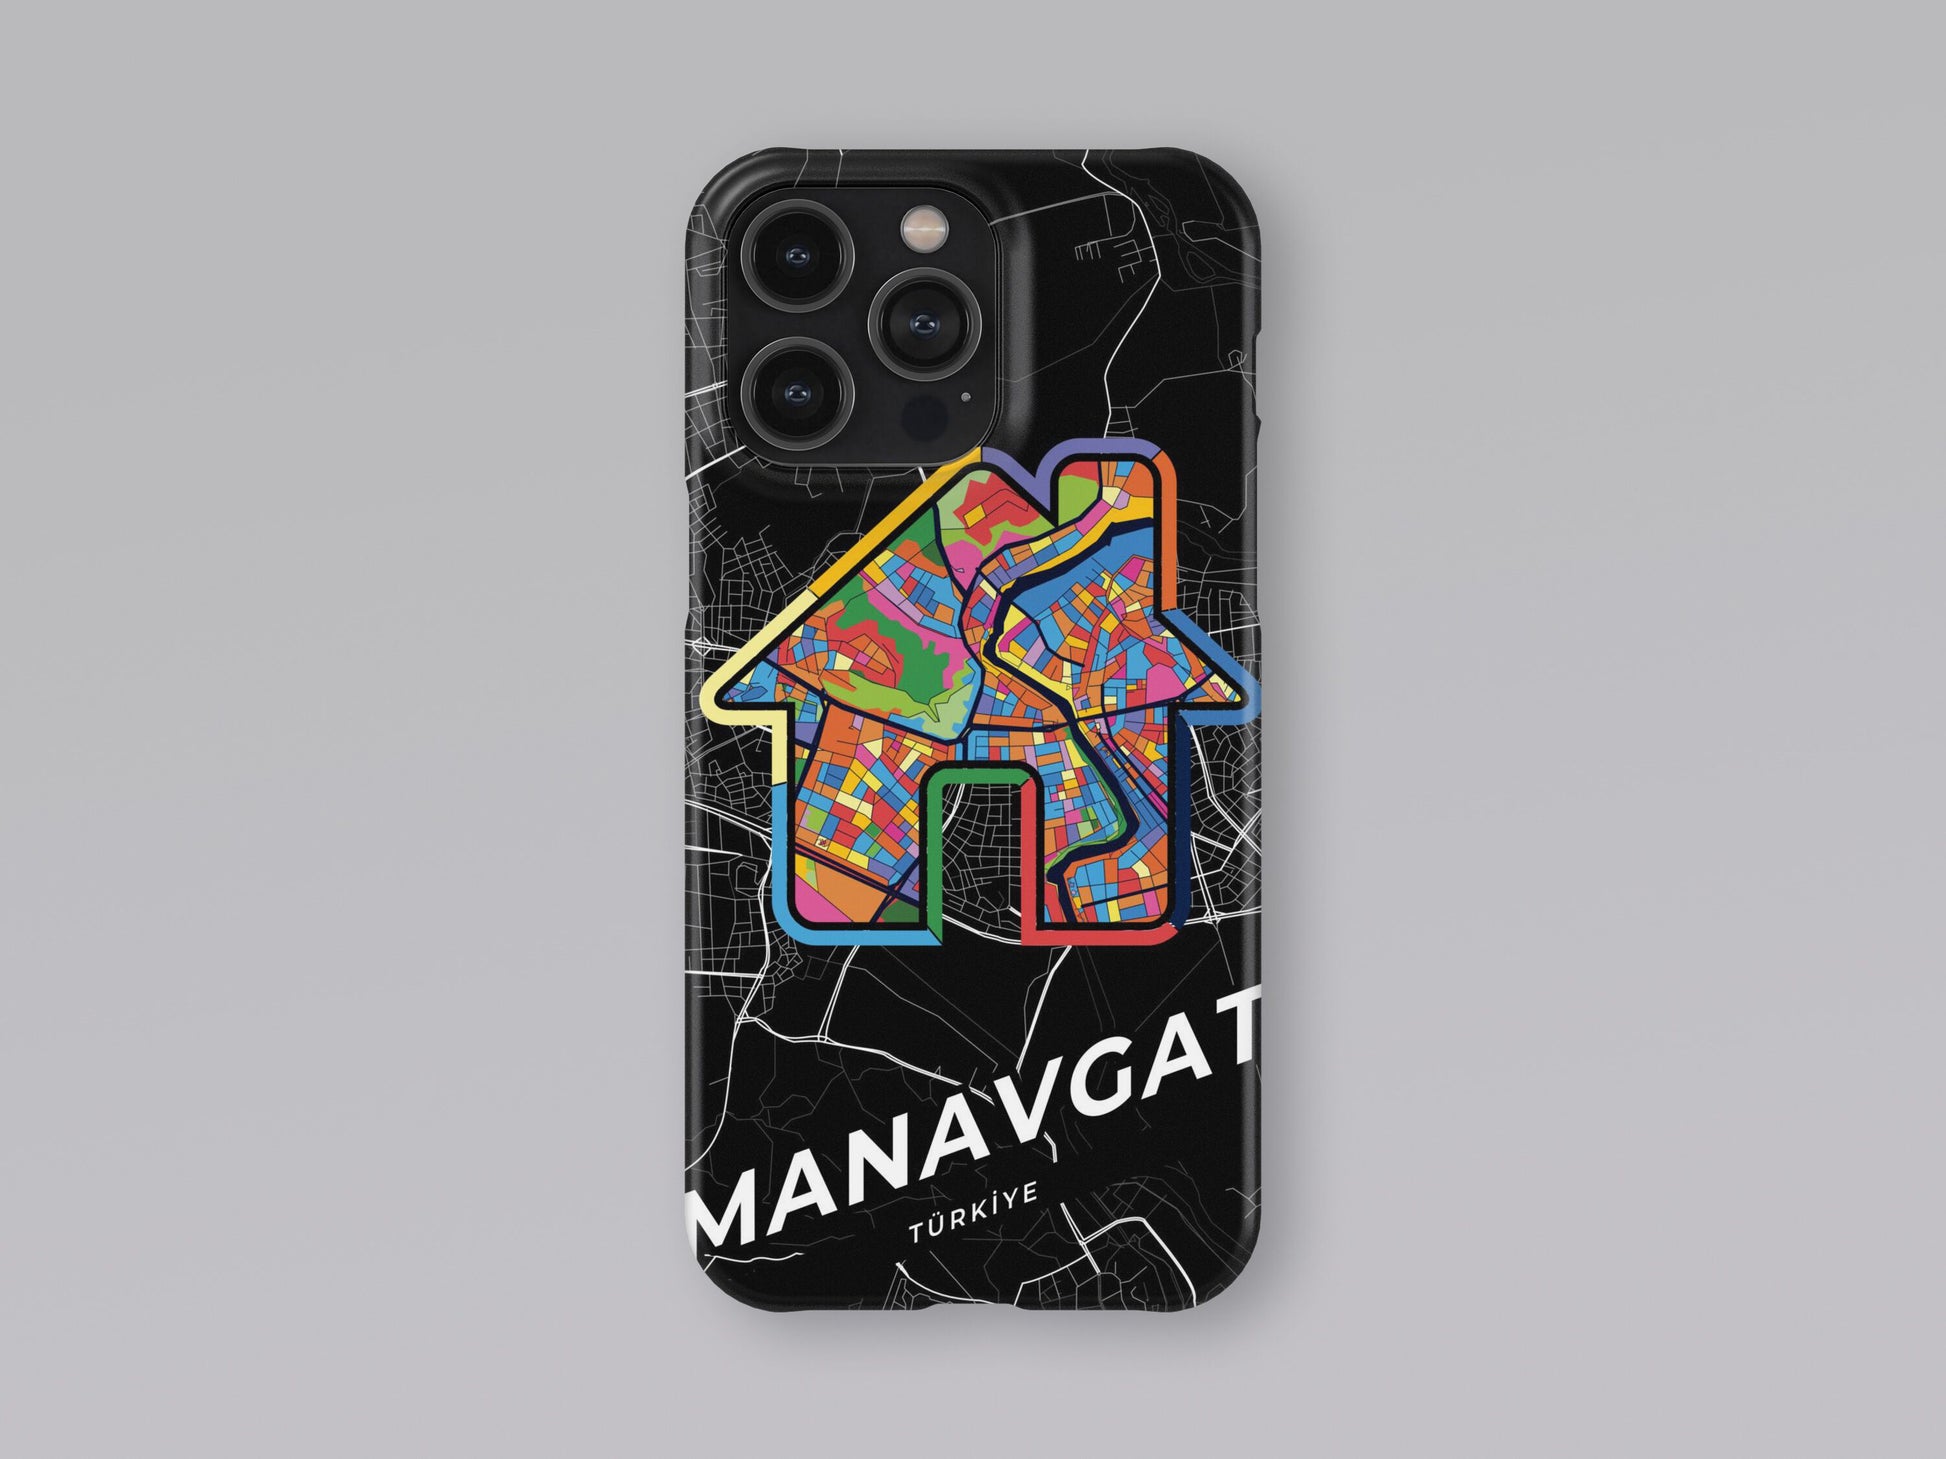 Manavgat Turkey slim phone case with colorful icon. Birthday, wedding or housewarming gift. Couple match cases. 3